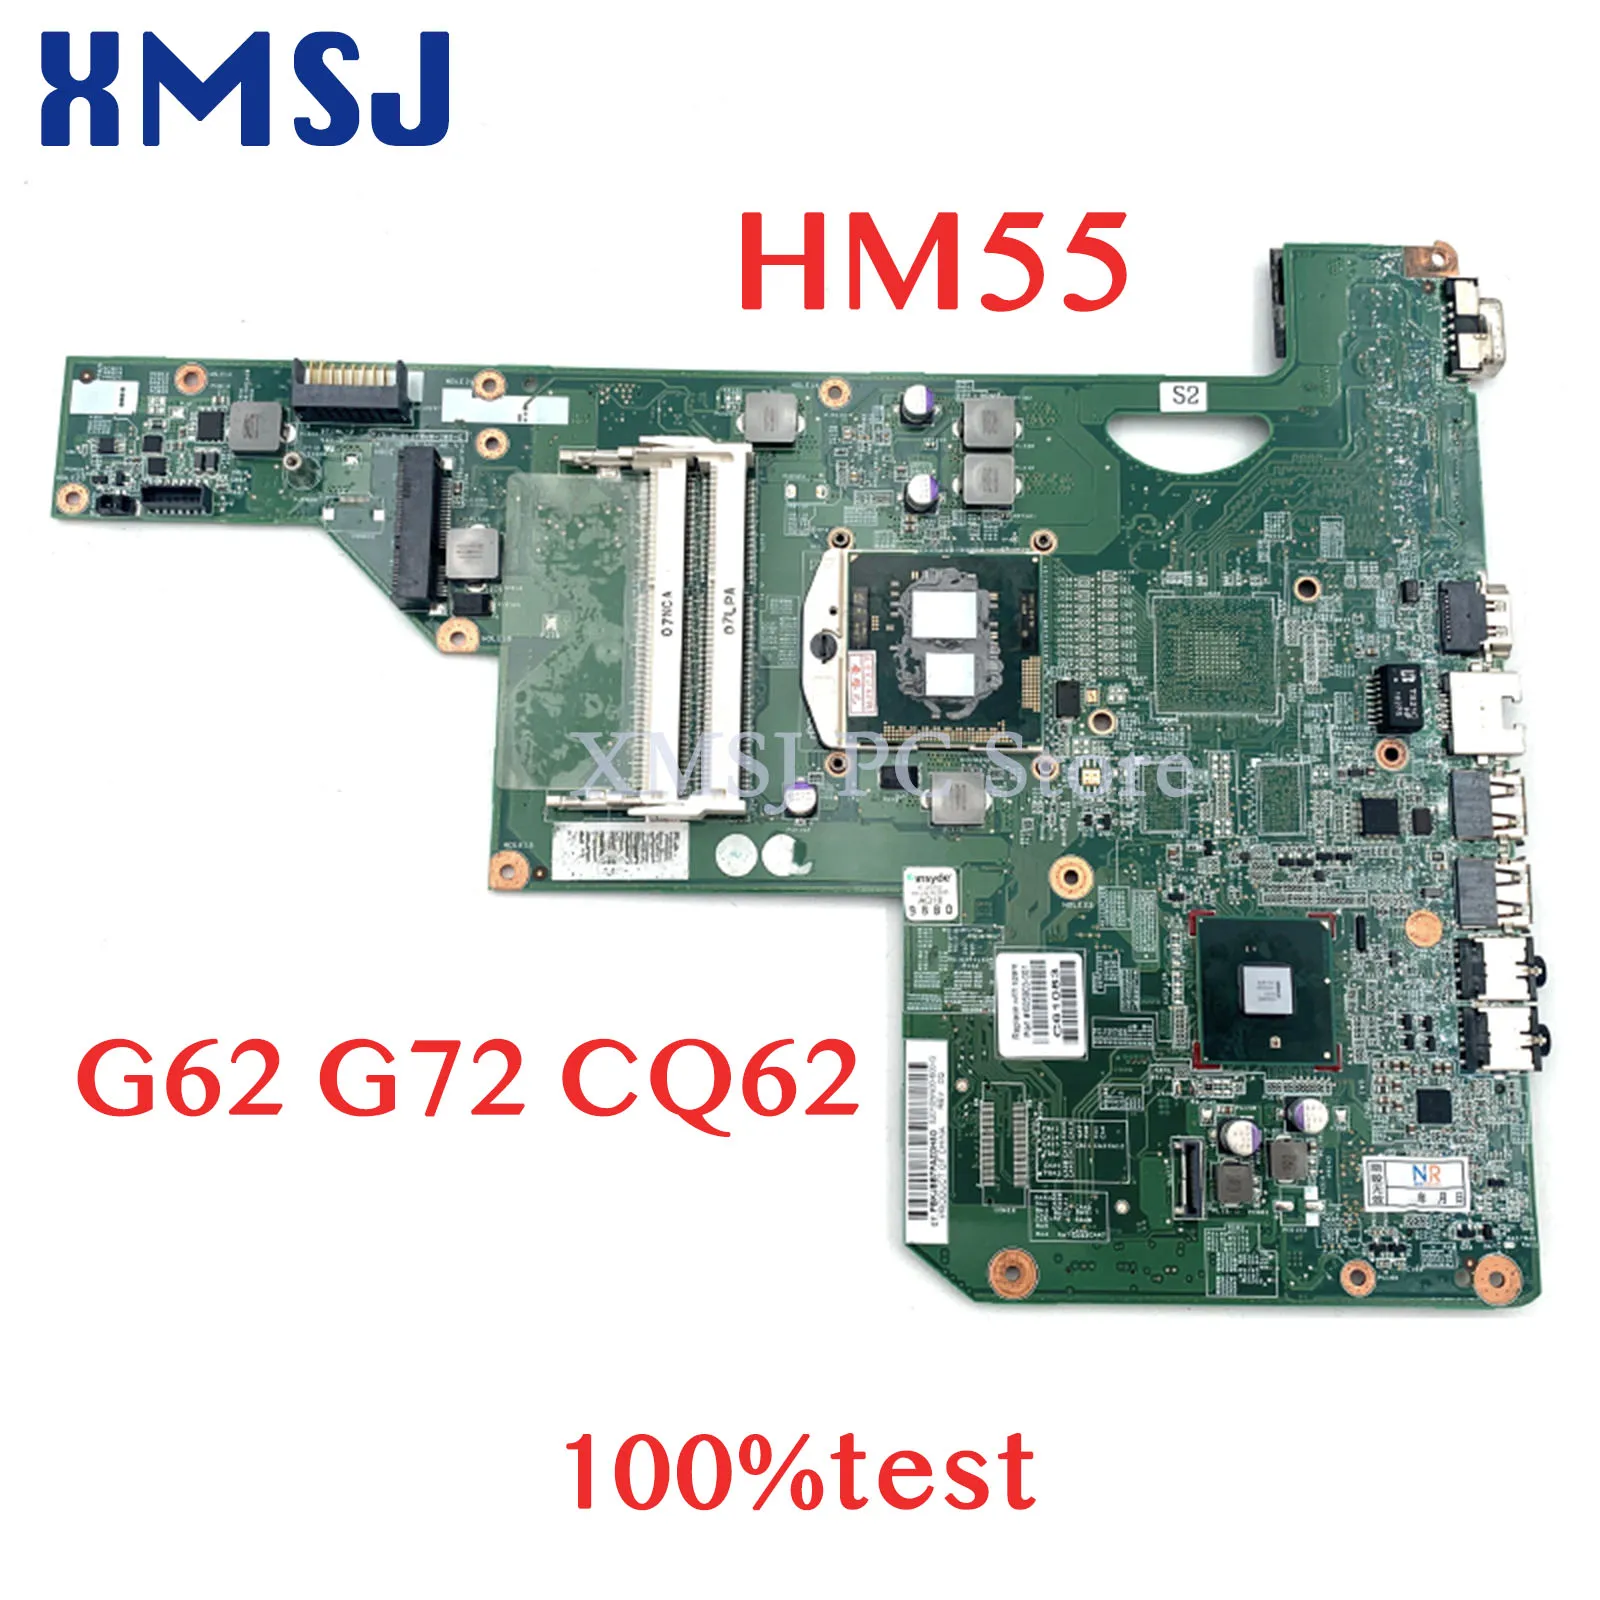 XMSJ 605903-001 615849-001 Laptop Motherboard For HP G62 G72 CQ62 HM55 UMA DDR3 MAIN BOARD Free CPU Fully Tested